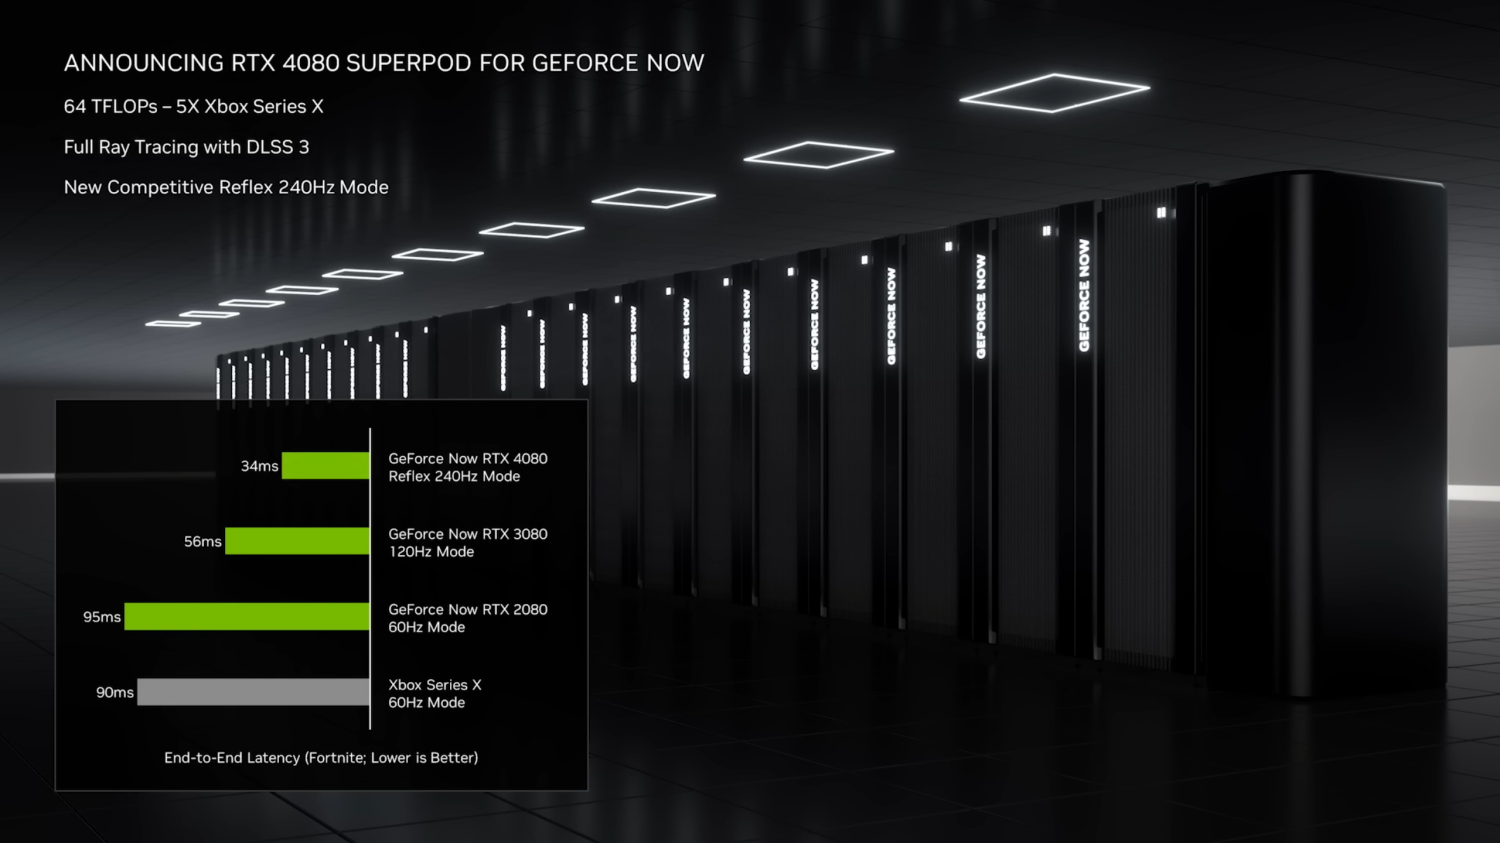 89968_1_nvidia-brings-supreme-geforce-rtx-40-gpu-power-to-now-game-streaming_full.png